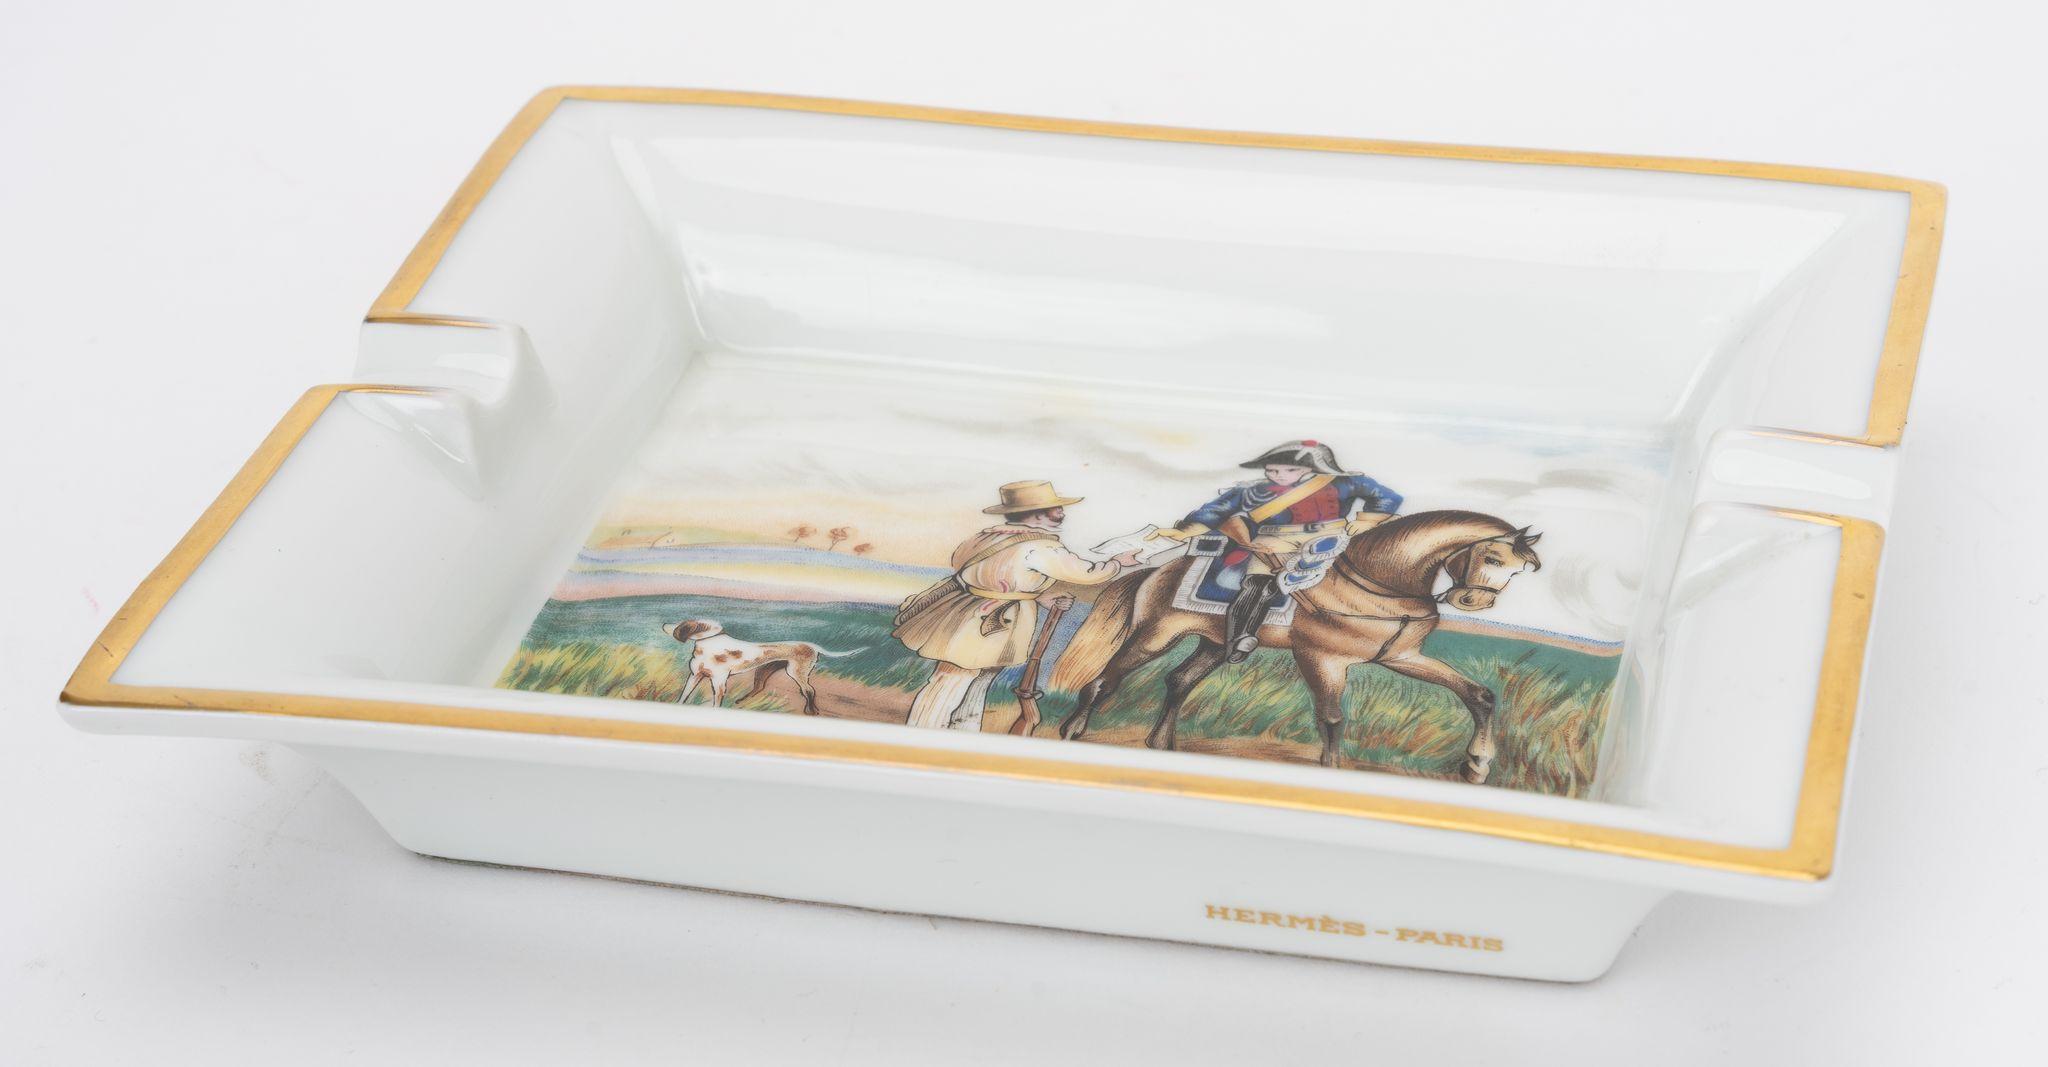 Hermès Collectible Napoleon Ashtray In Excellent Condition For Sale In West Hollywood, CA